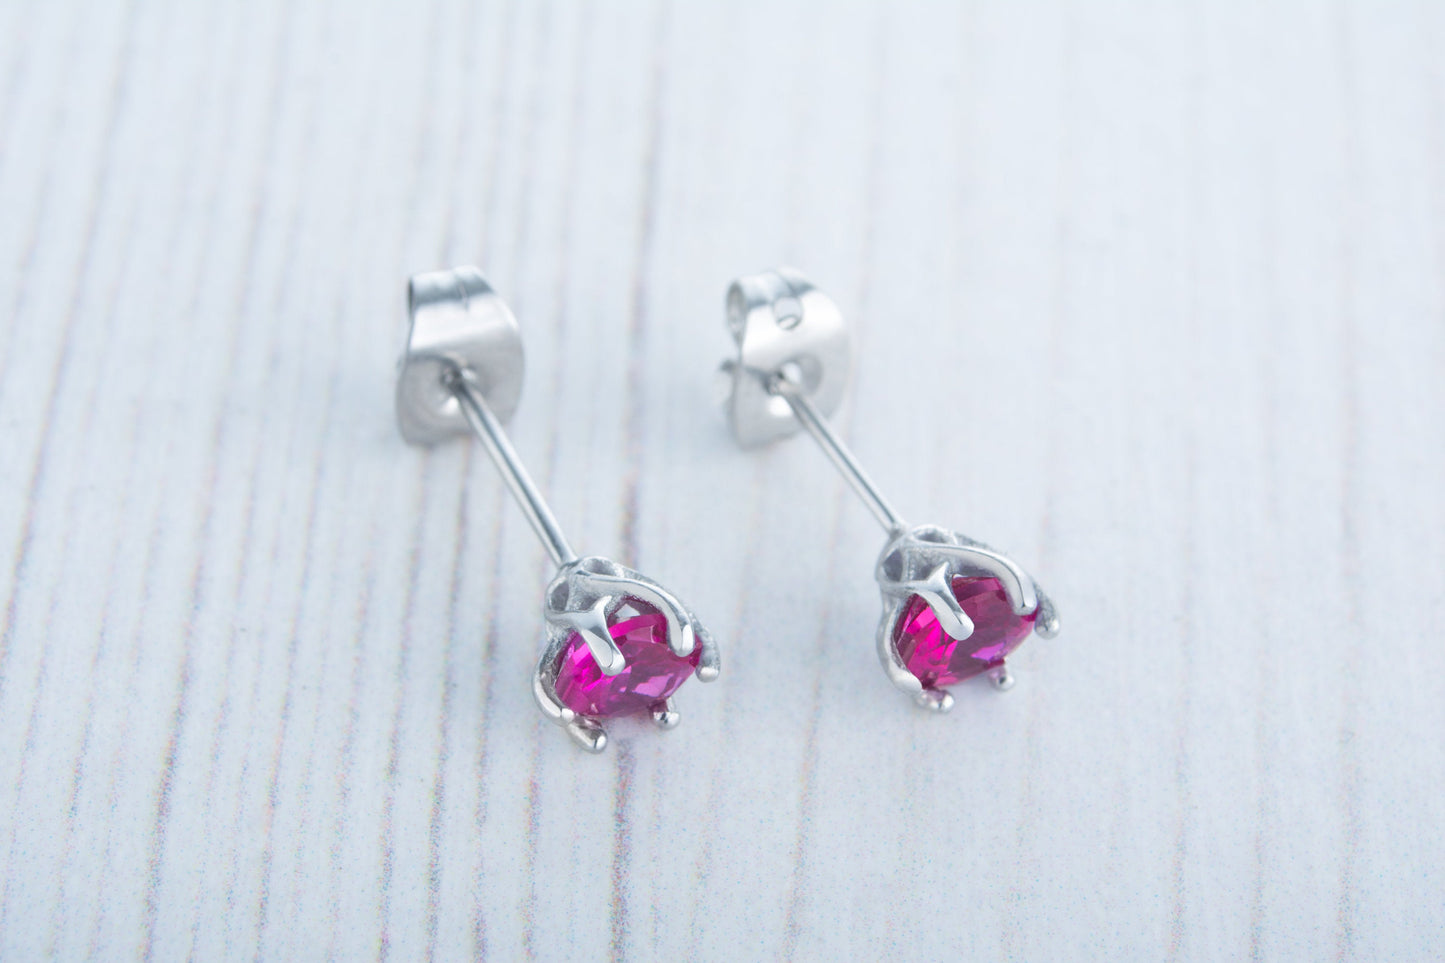 Lab Ruby stud earrings, available in titanium, white gold and surgical steel 4mm, 5mm and 6mm sizes